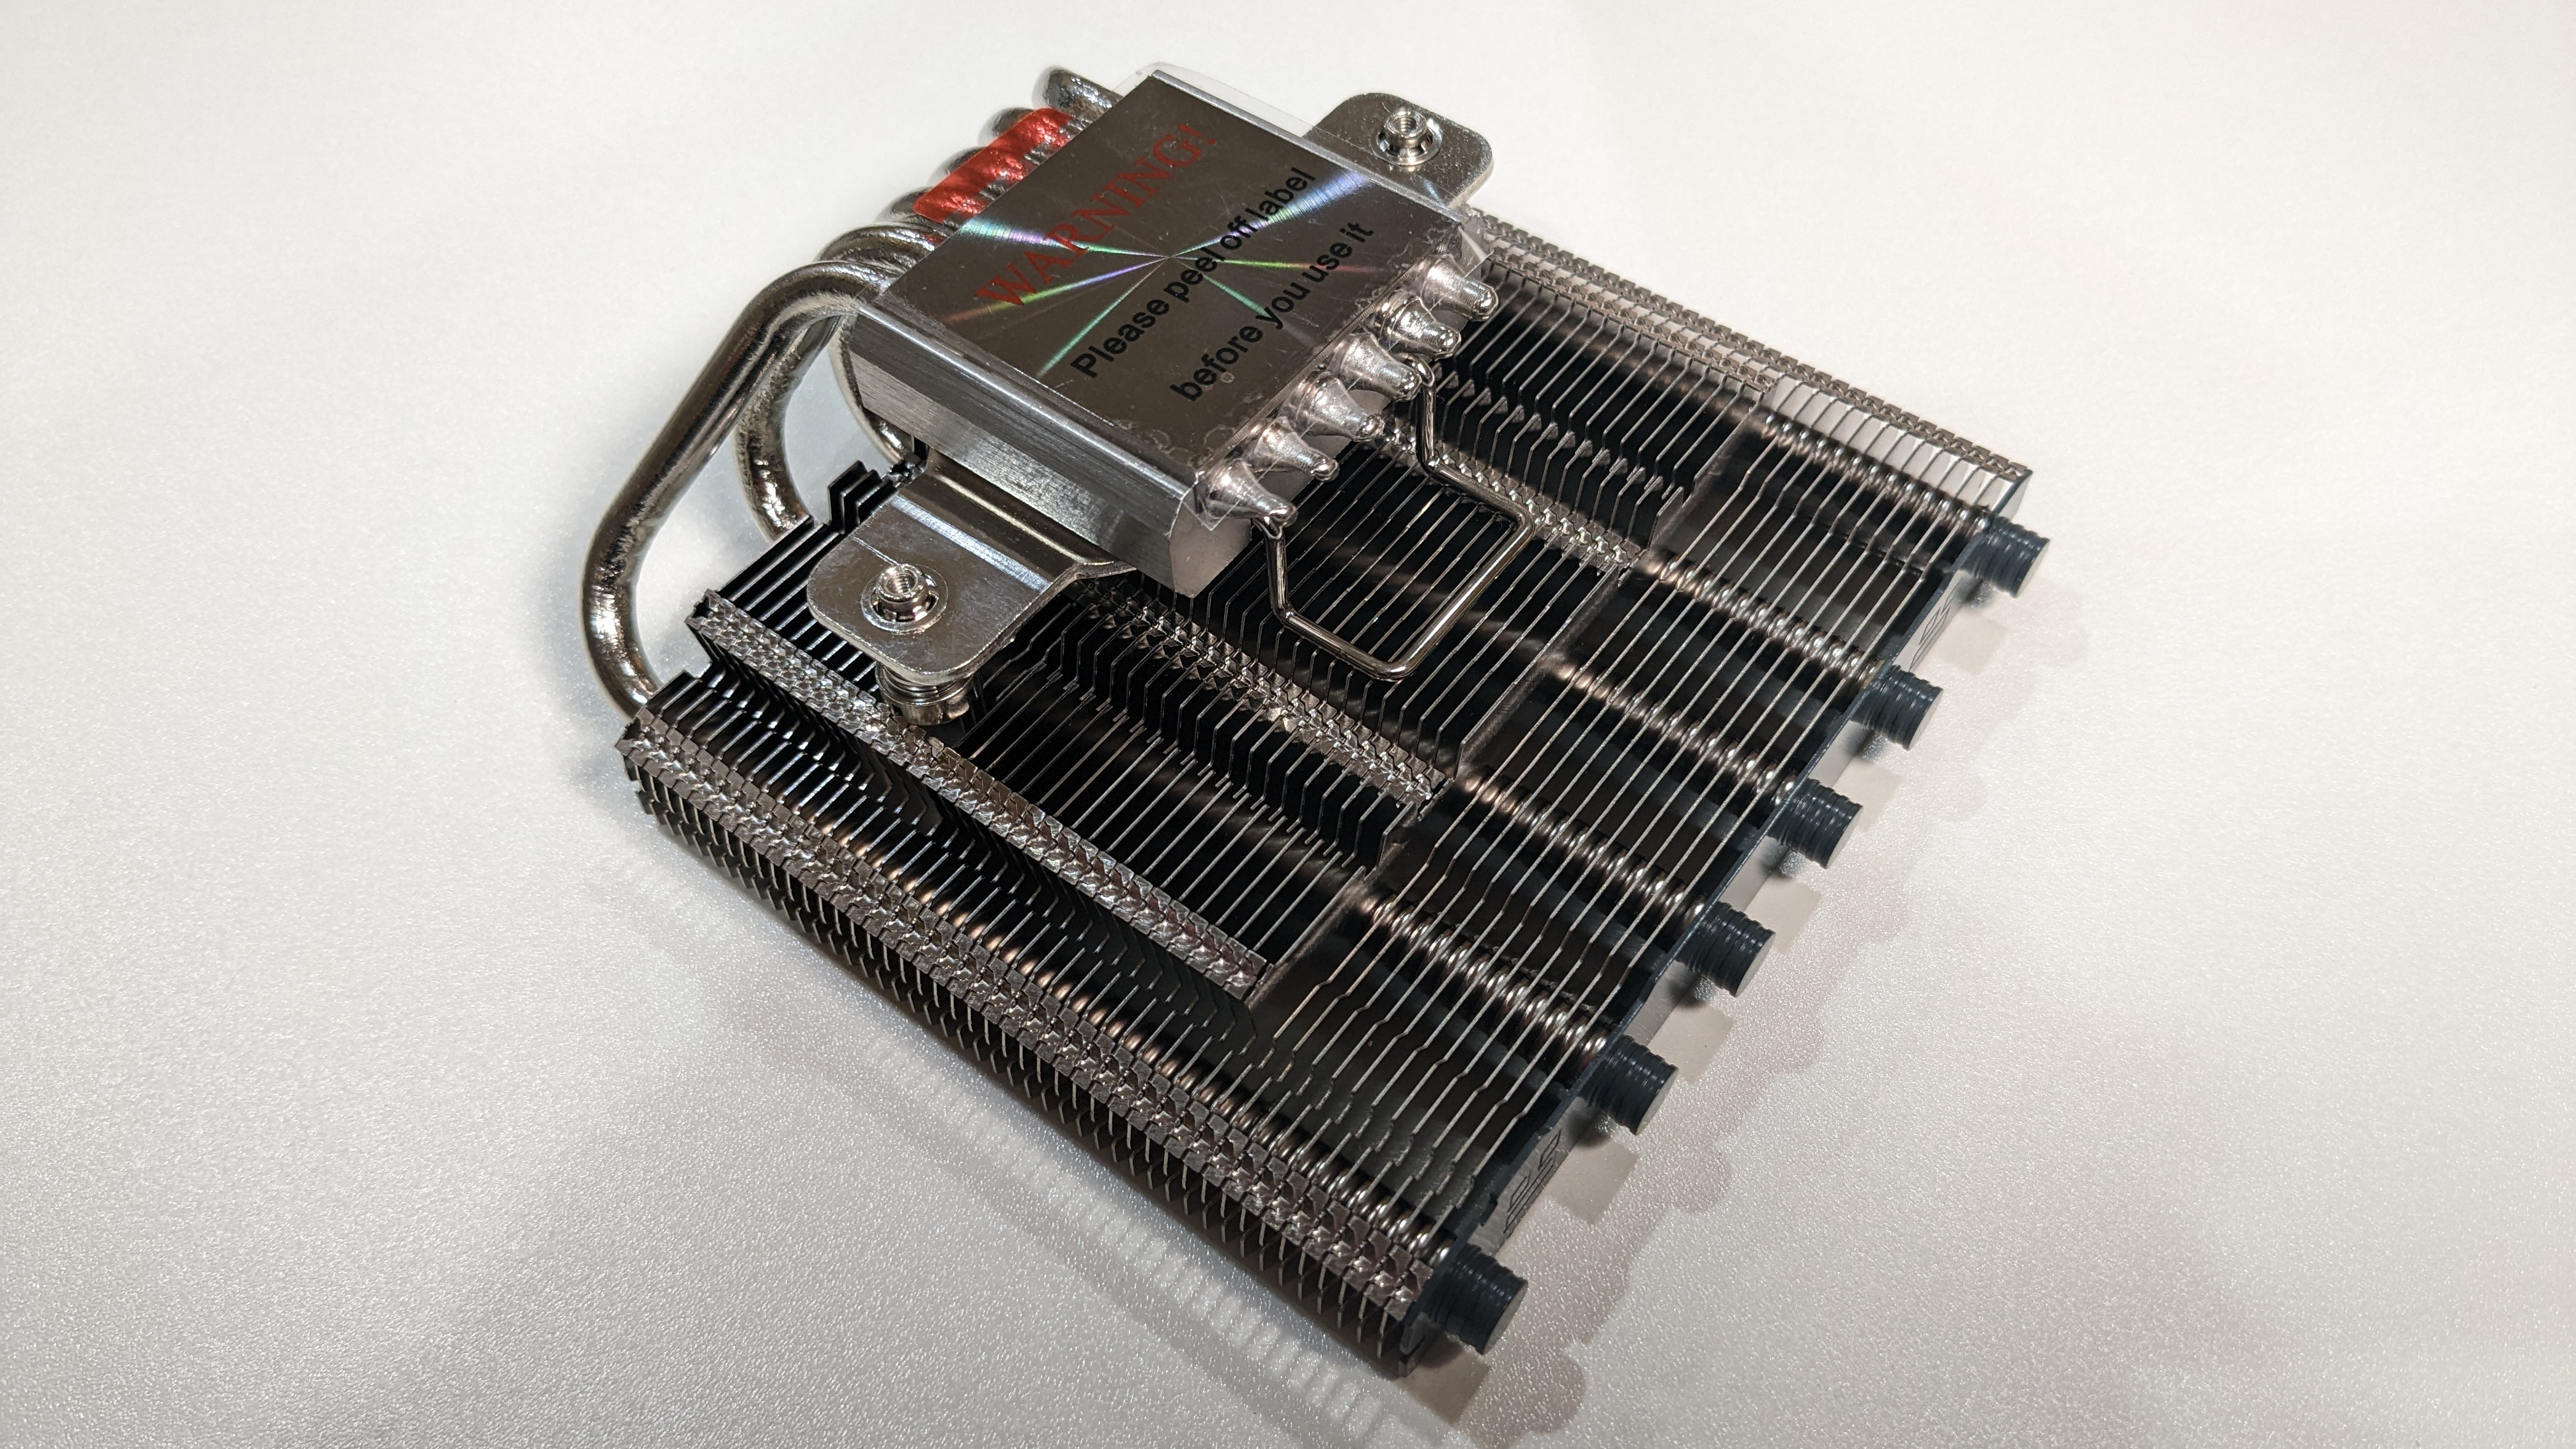 Thermalright AXP120-X67 SFF Cooler Review